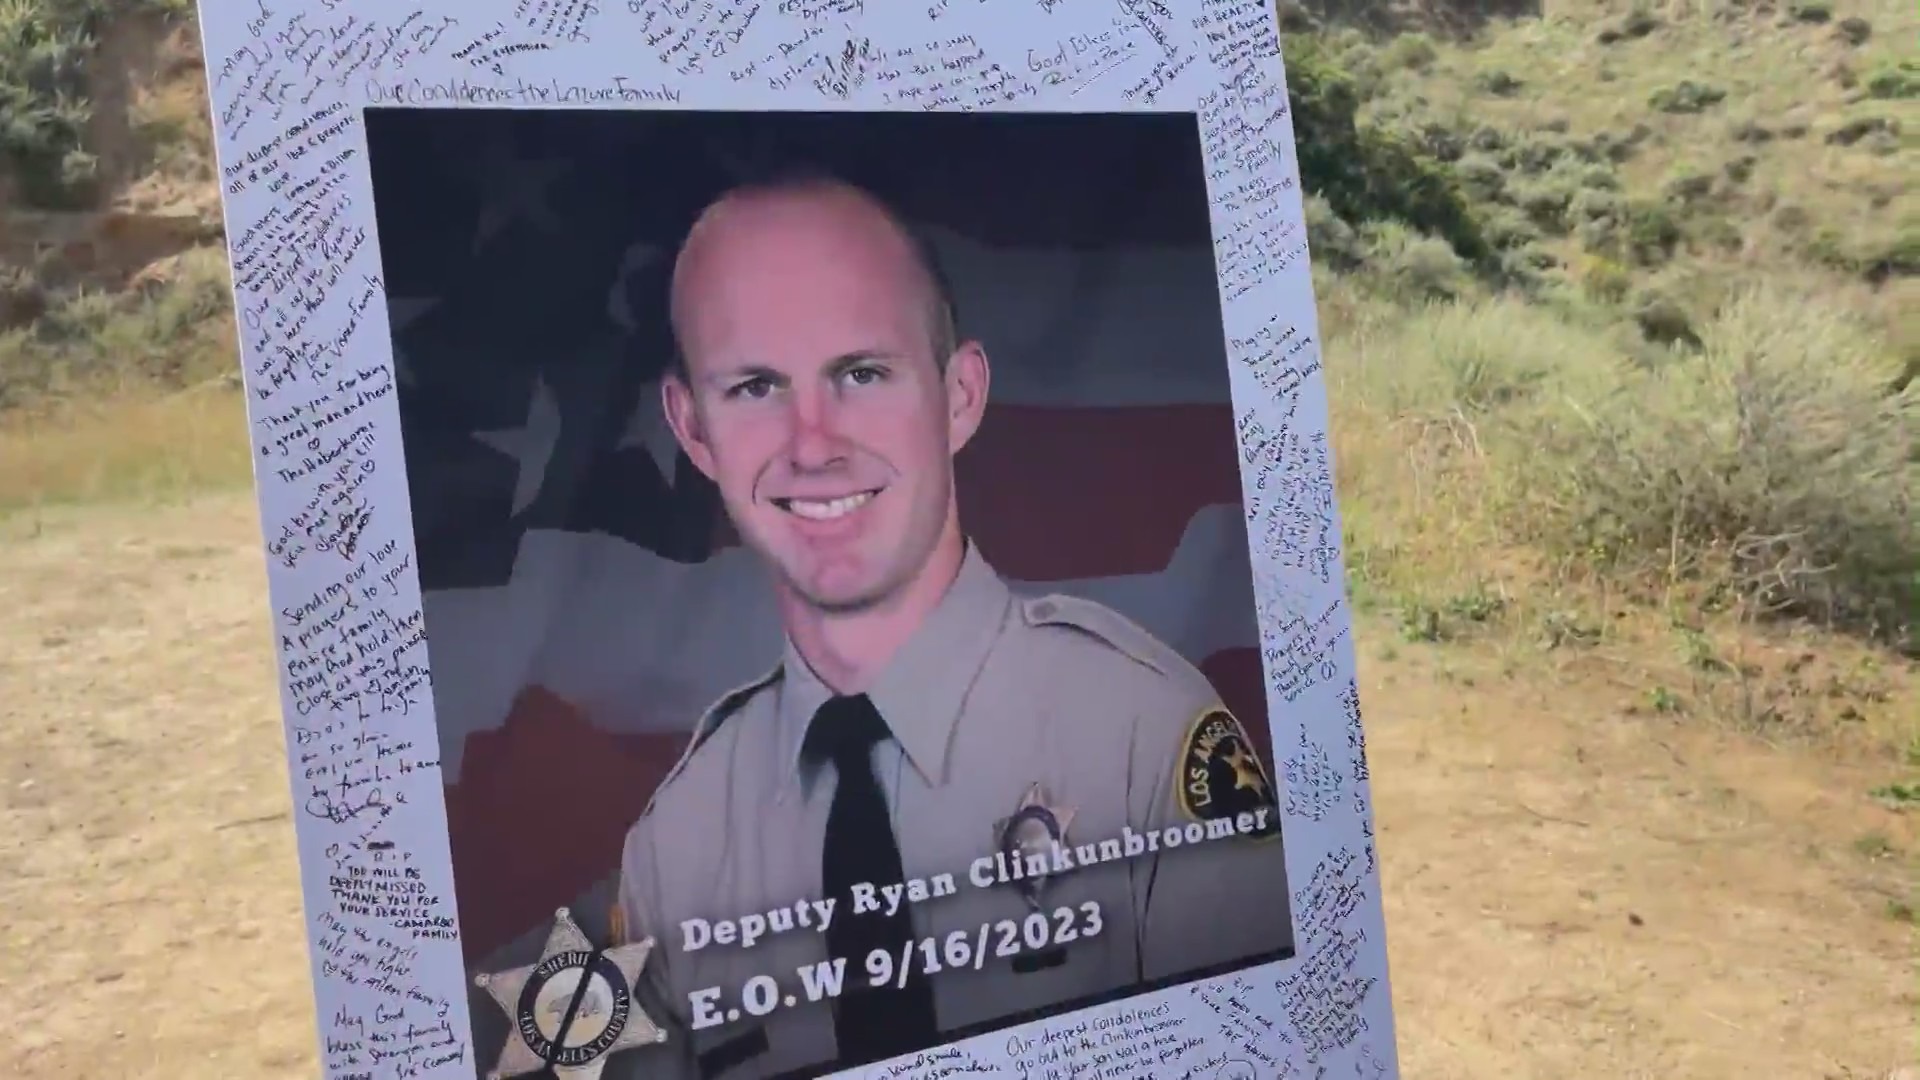 Memorial climb held for L.A. County Sheriff’s Deputy Ryan Clinkunbroomer at the Central Park stairs in Santa Clarita on Sept. 19, 2023. (KTLA)